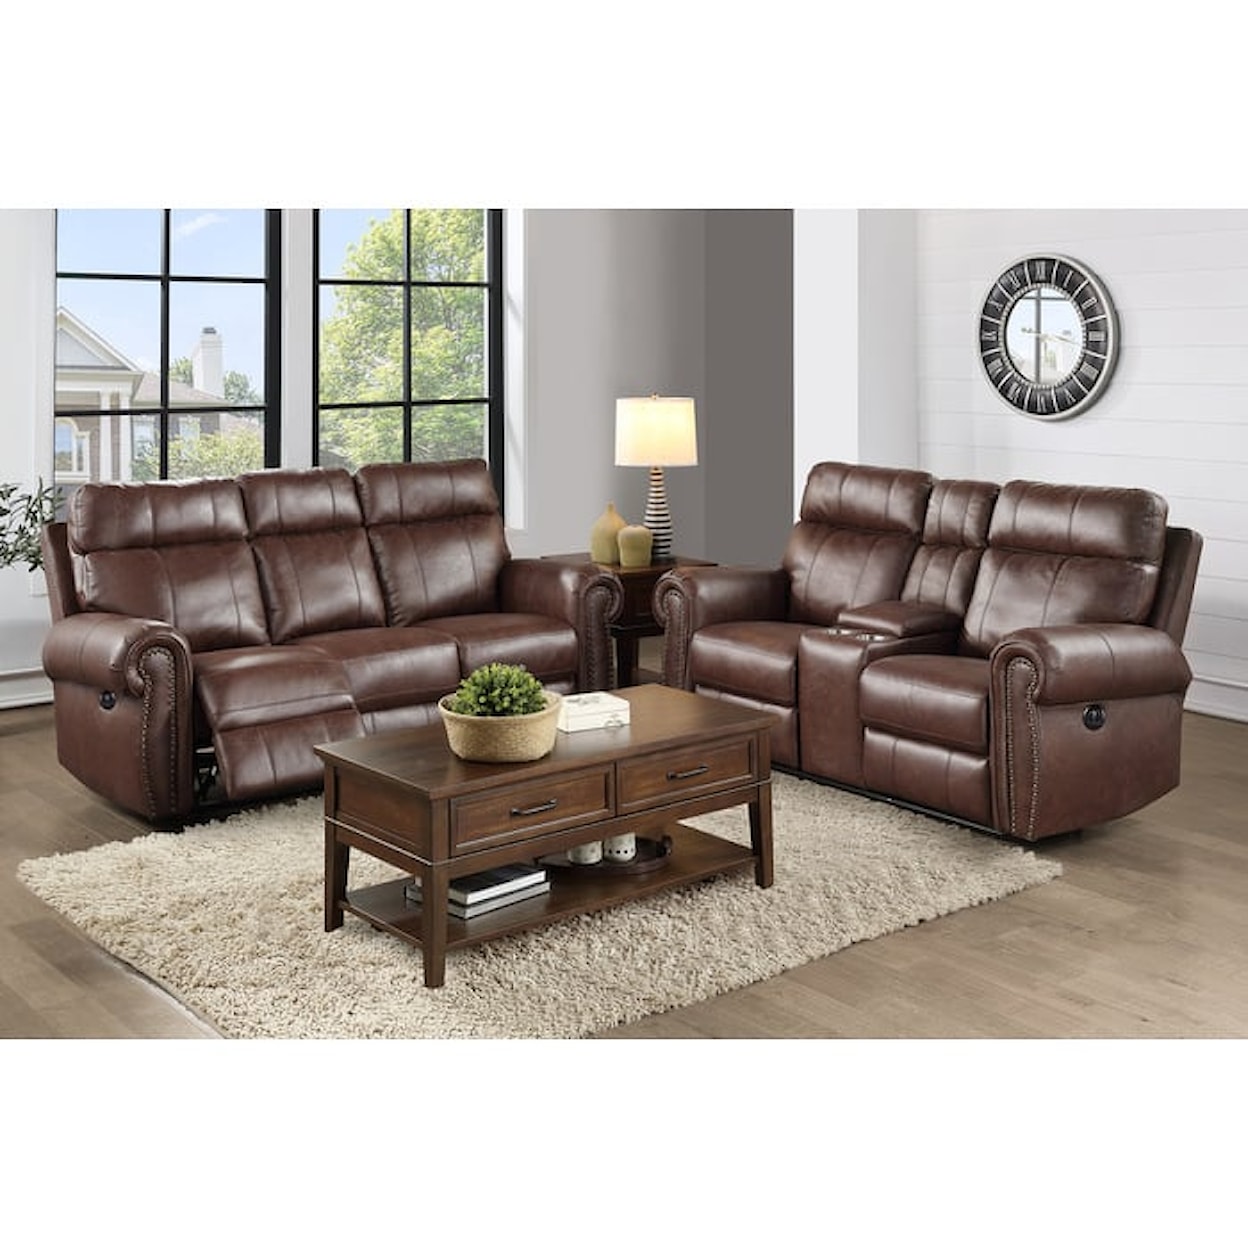 Homelegance Granville Double Reclining Sofa